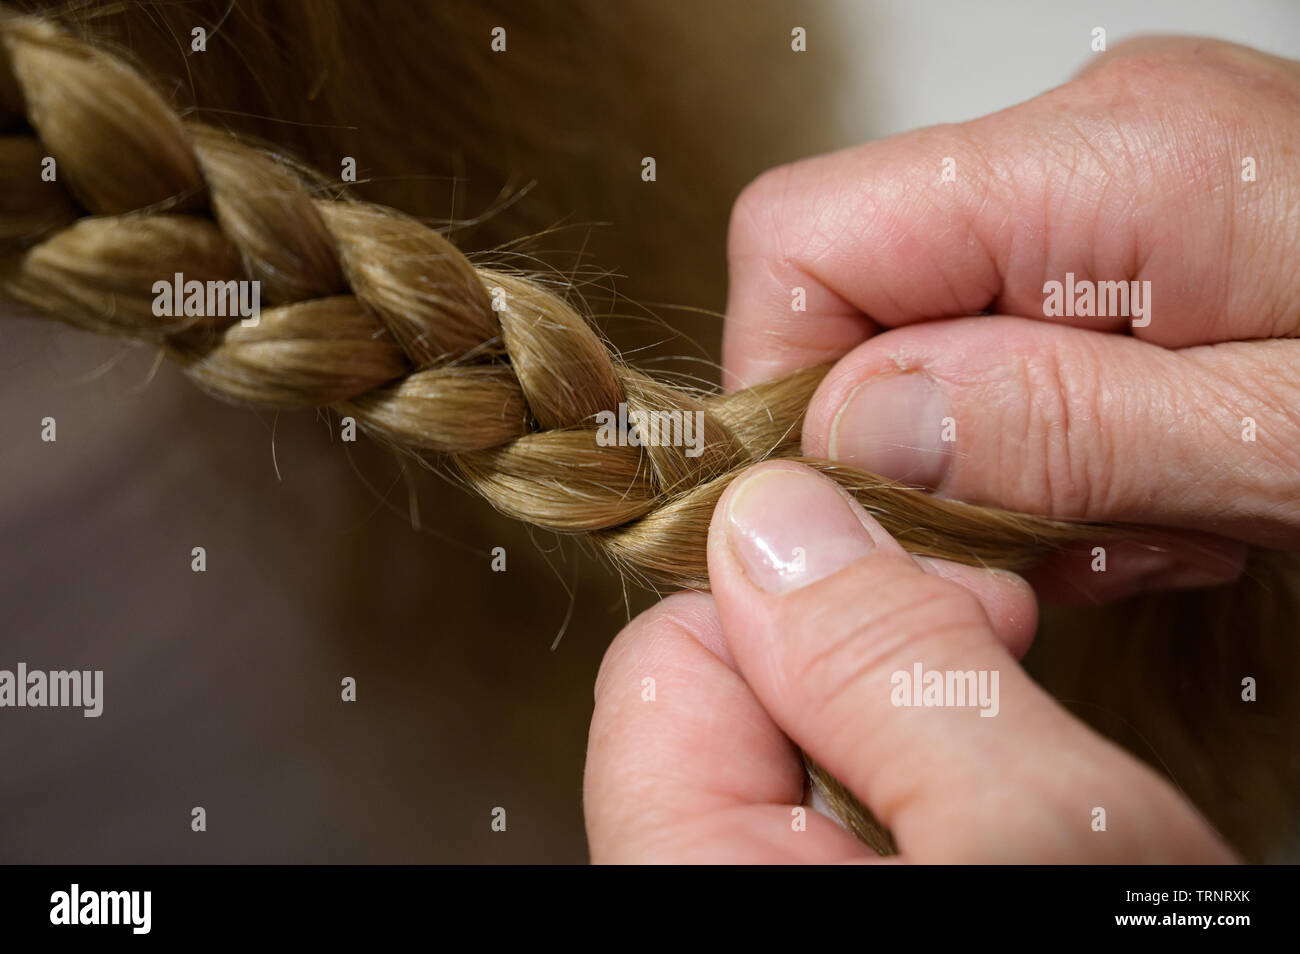 randmother make pigtail her granddaughter. Selective focus. Stock Photo